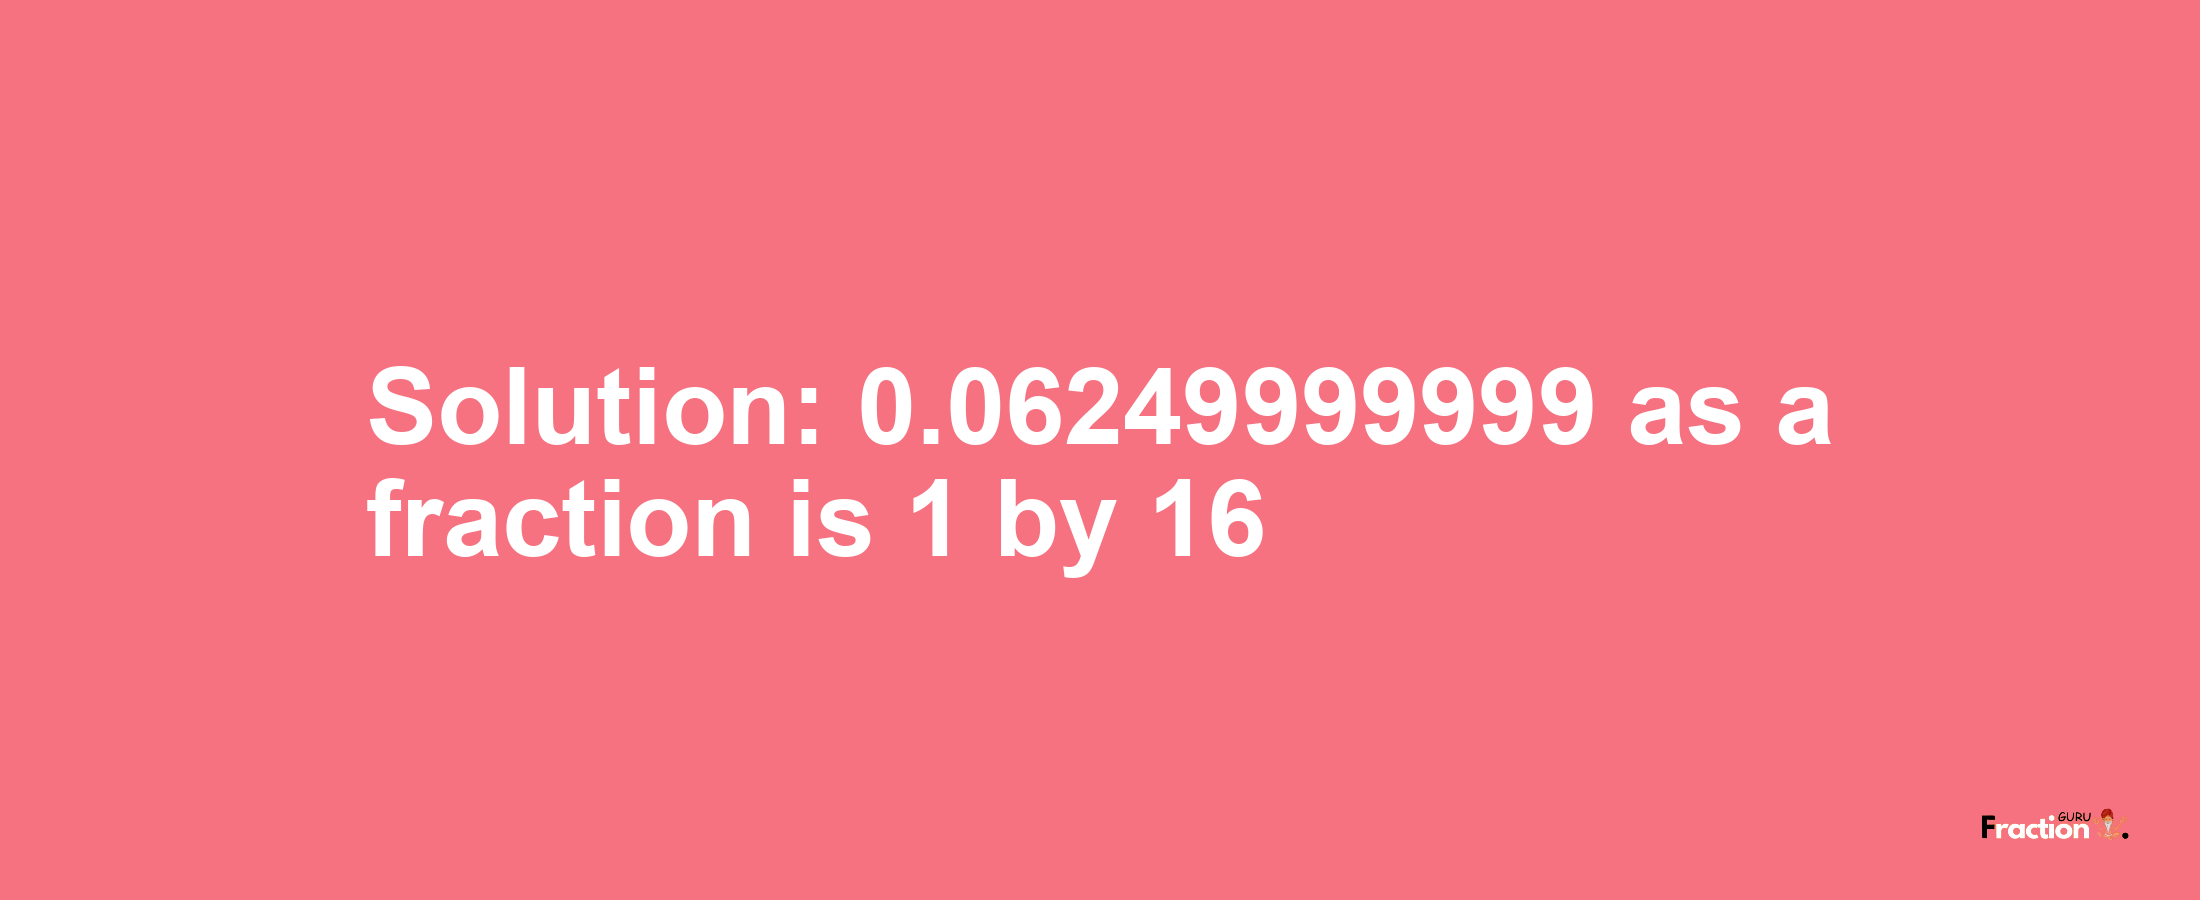 Solution:0.06249999999 as a fraction is 1/16